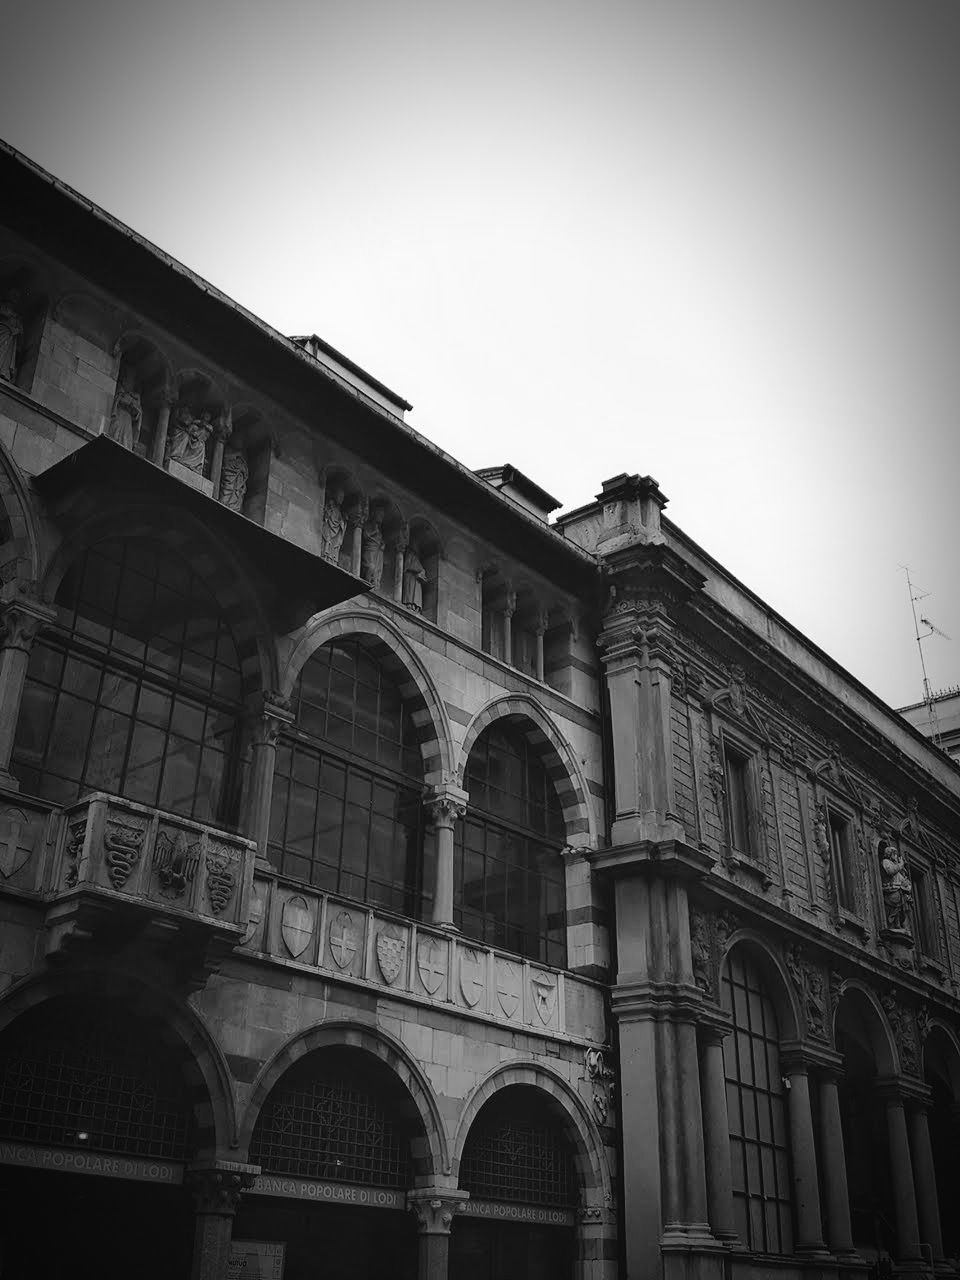 architecture, built structure, arch, building exterior, black and white, monochrome, low angle view, sky, monochrome photography, history, the past, black, no people, nature, travel destinations, building, darkness, city, clear sky, white, landmark, outdoors, day